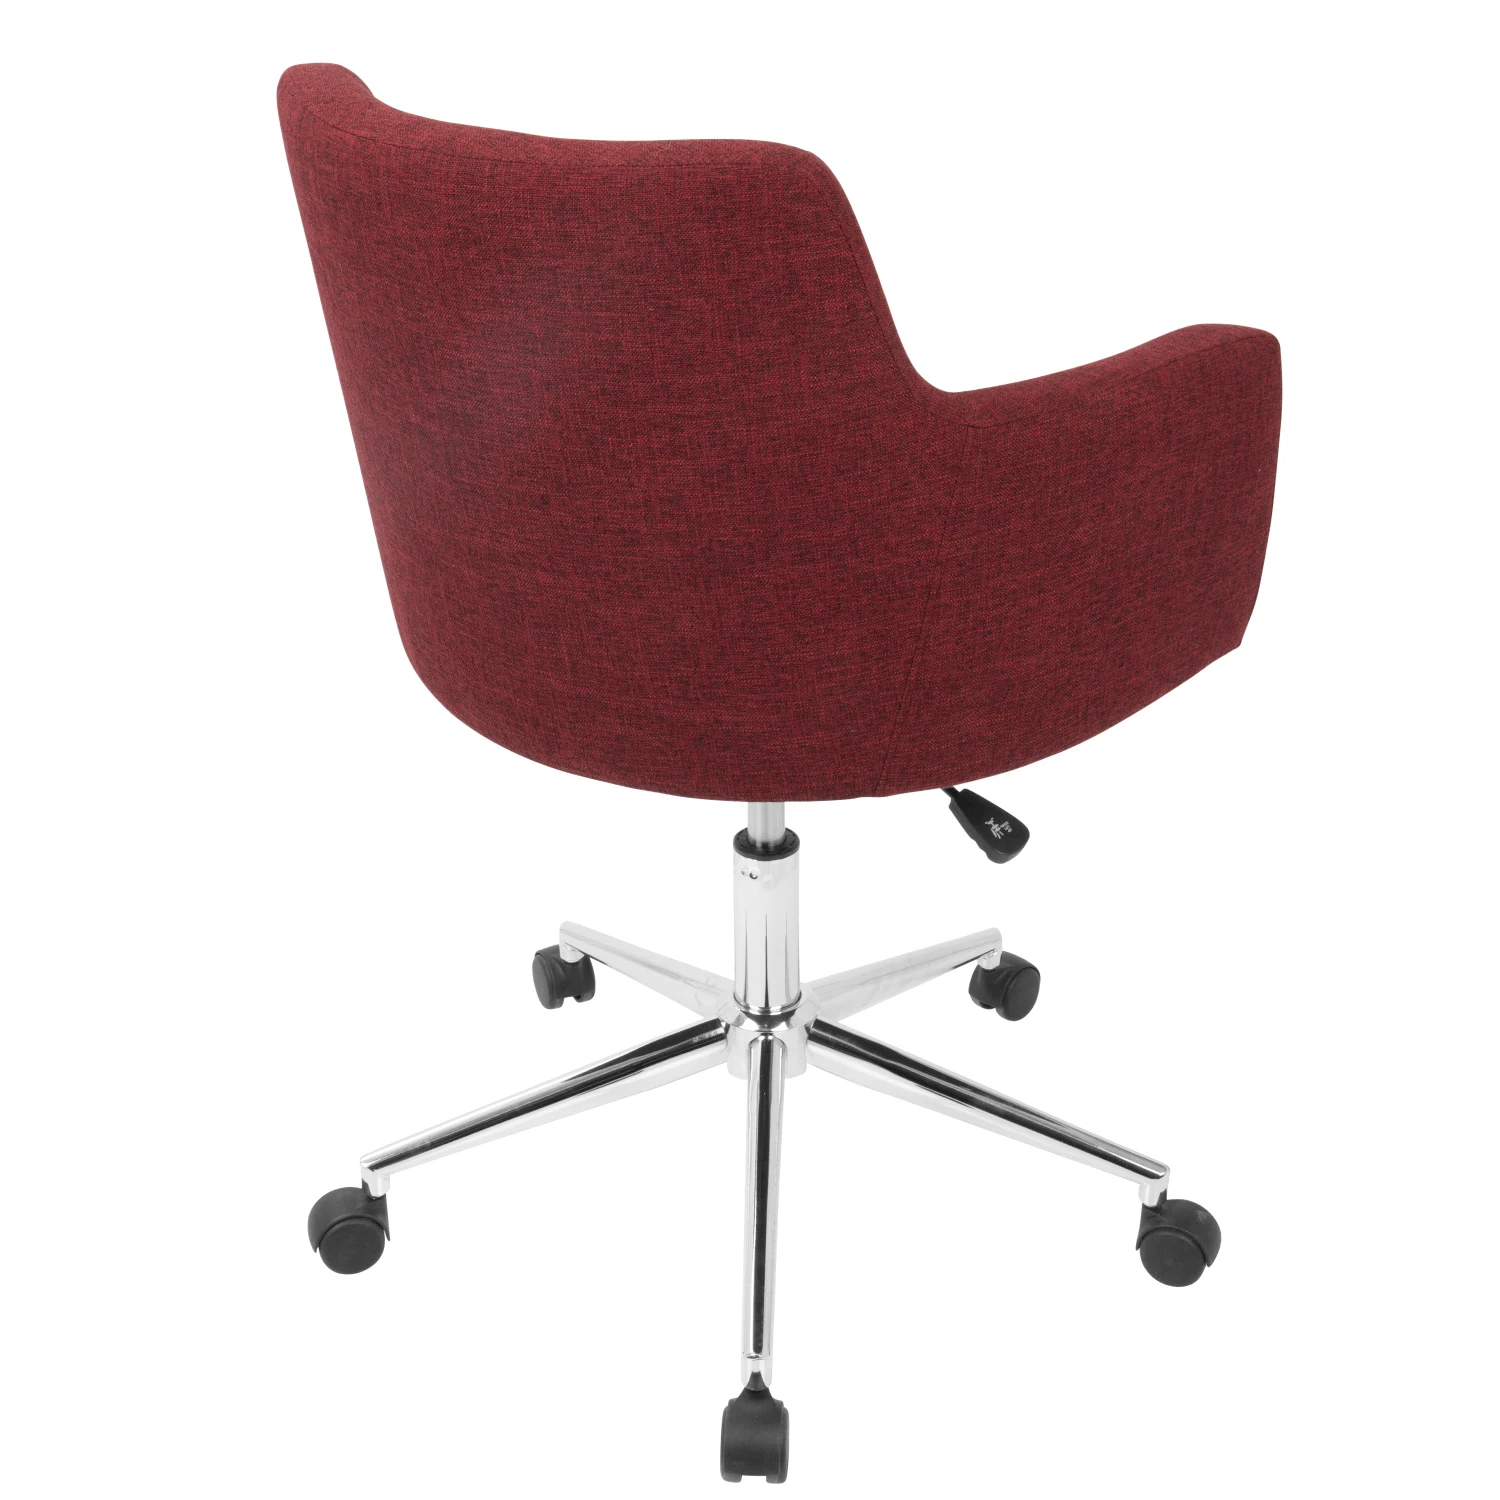 Contemporary Red Adjustable Office Chair with Modern Design and Ergonomic Support from LumiSource